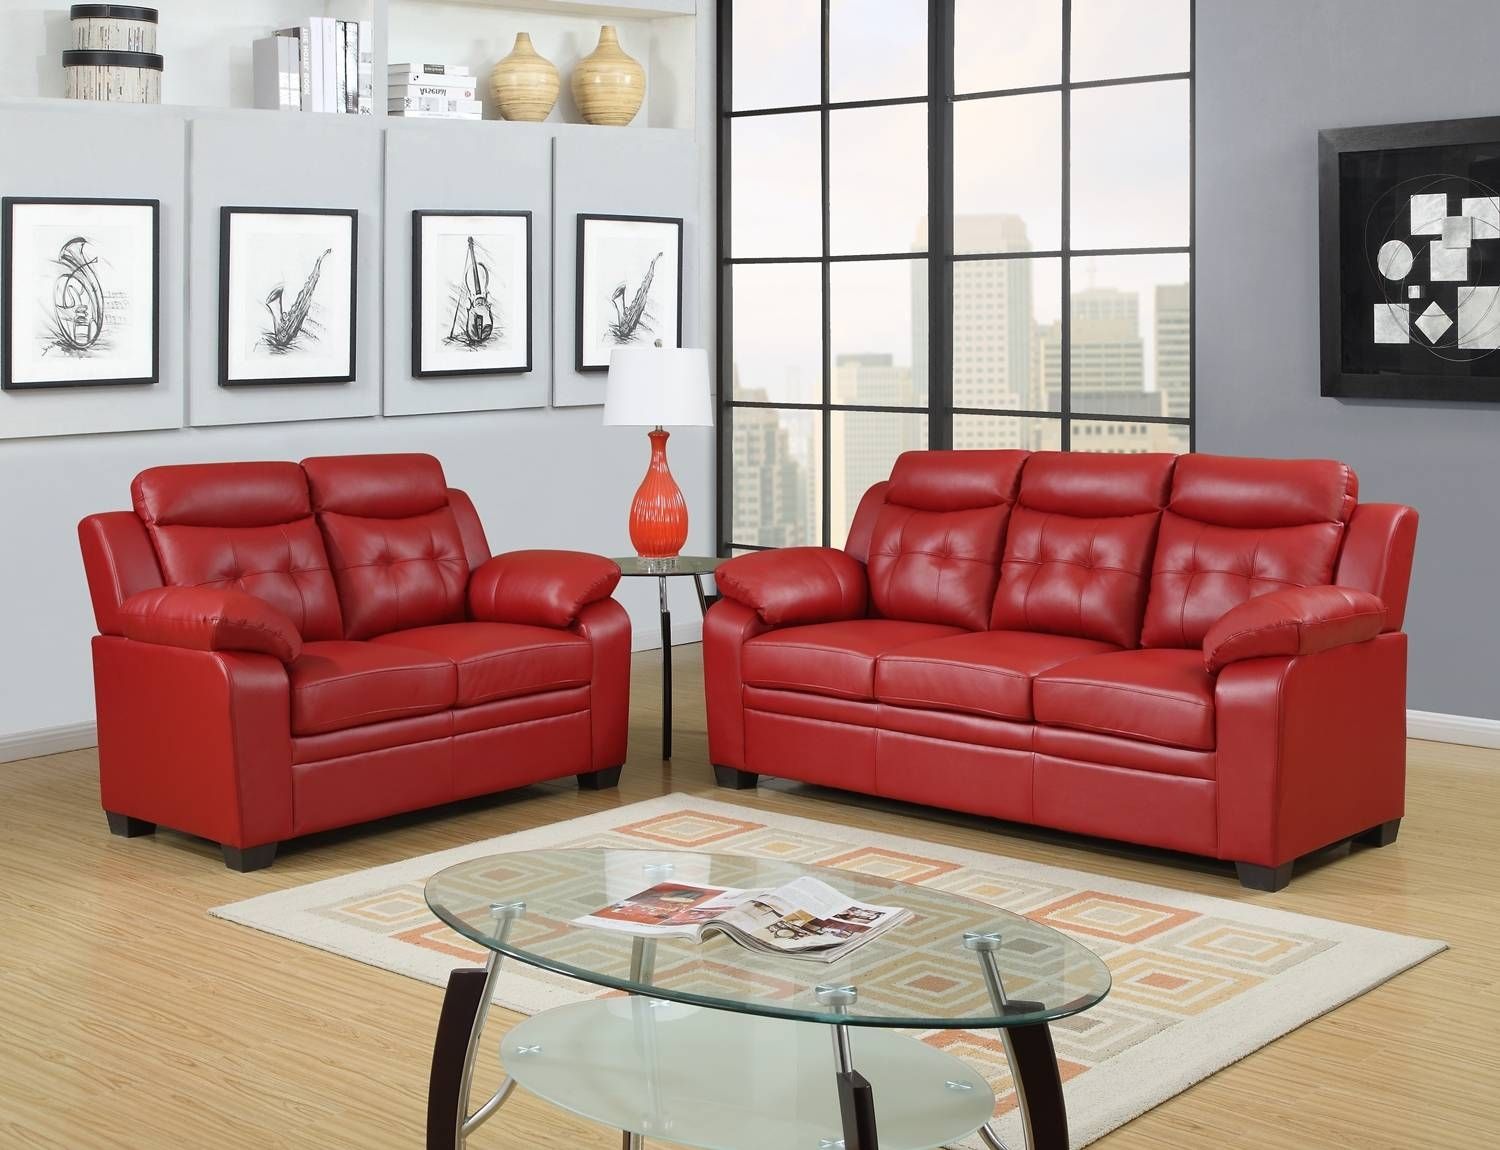 Sofas Center : Red Sofa Set Arrangements Modernic Sets Leather Regarding Black And Red Sofa Sets (View 15 of 15)